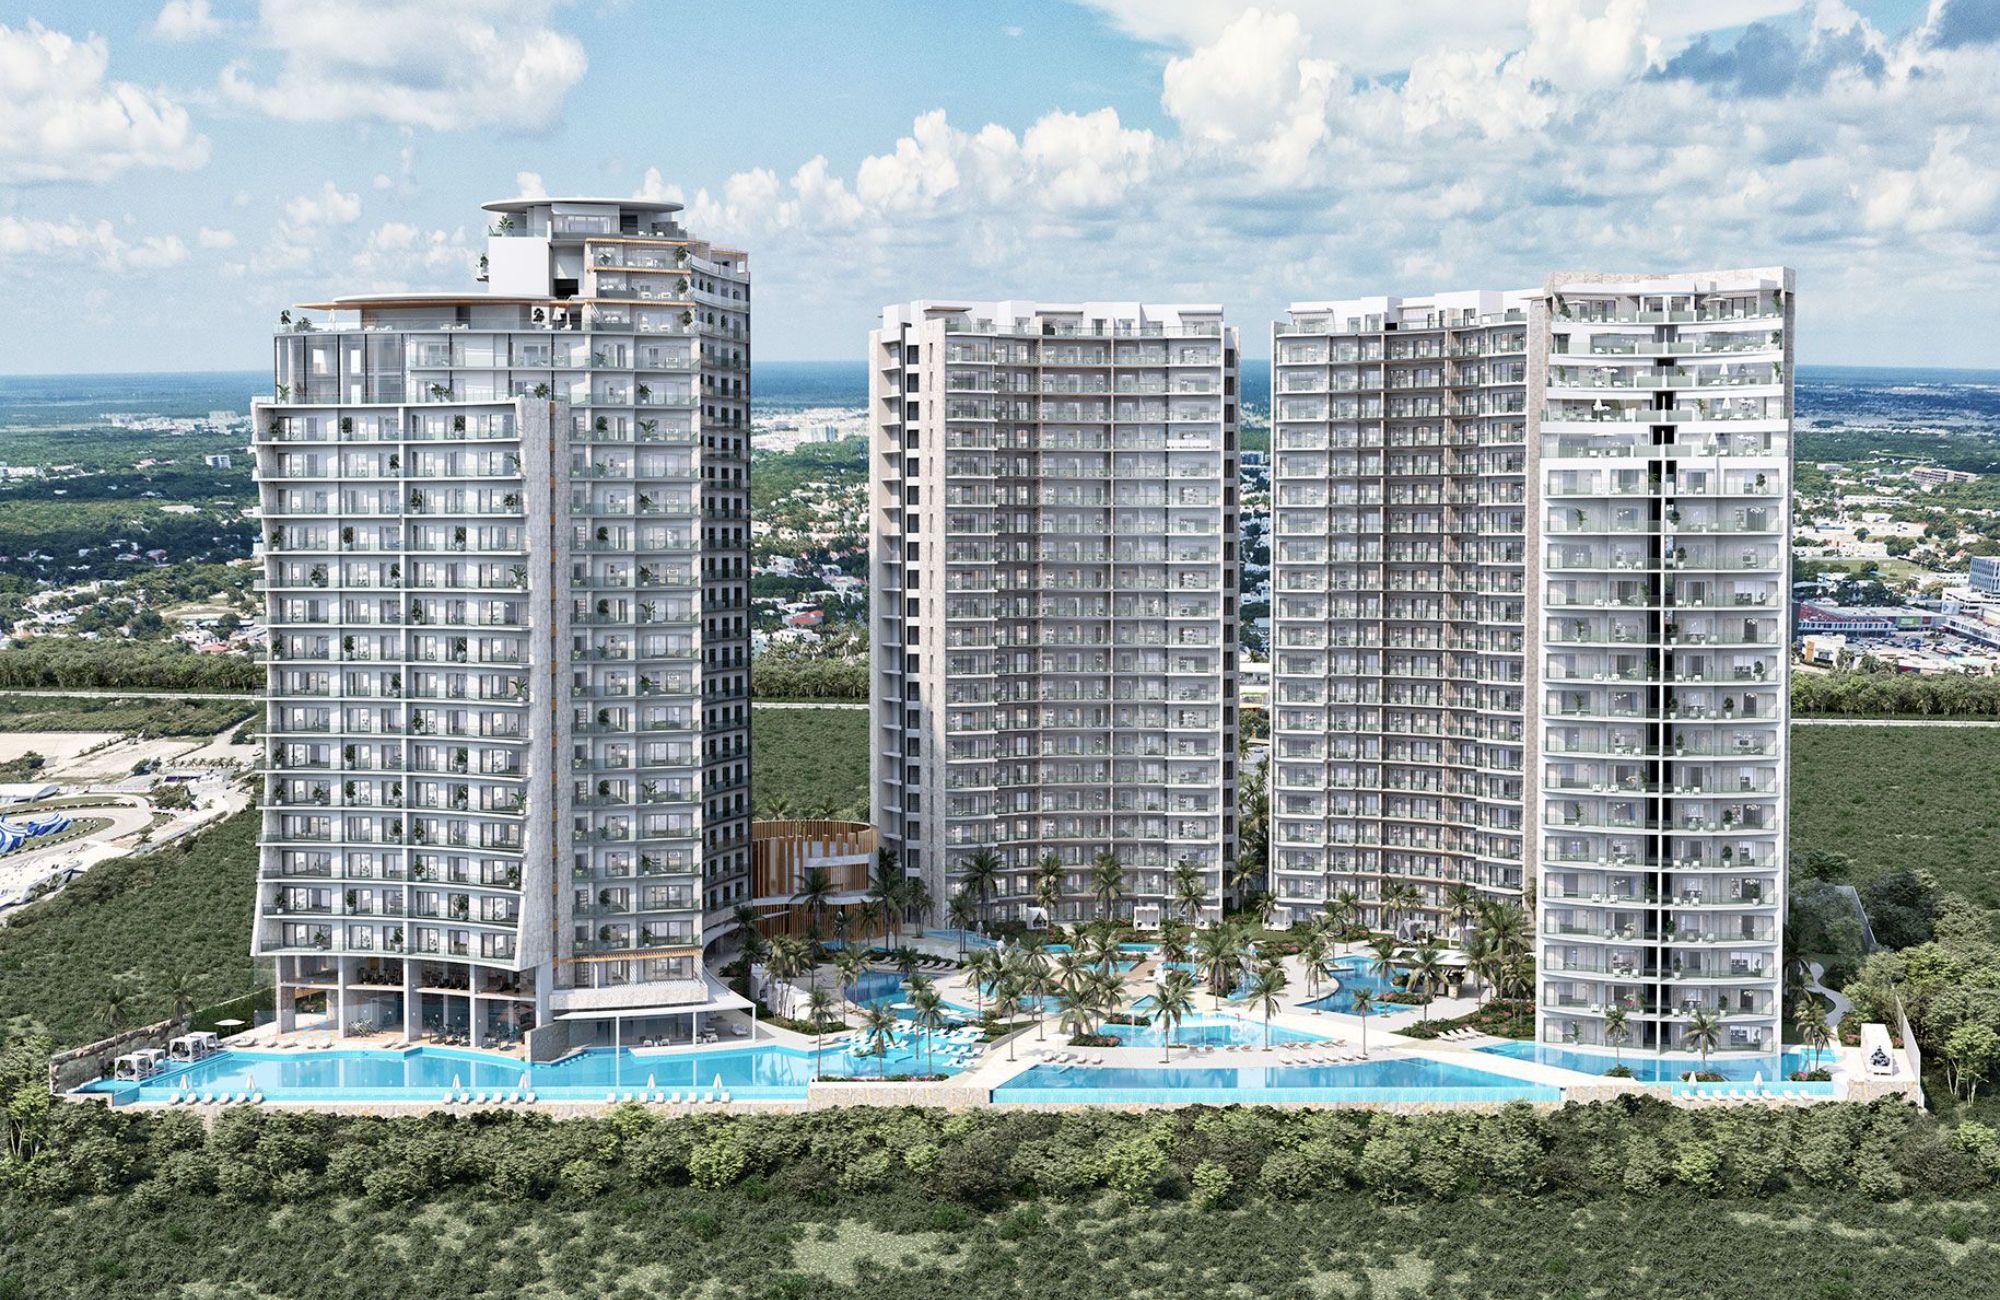 Invest in your tranquility: 3 bedroom condominium in the best area.